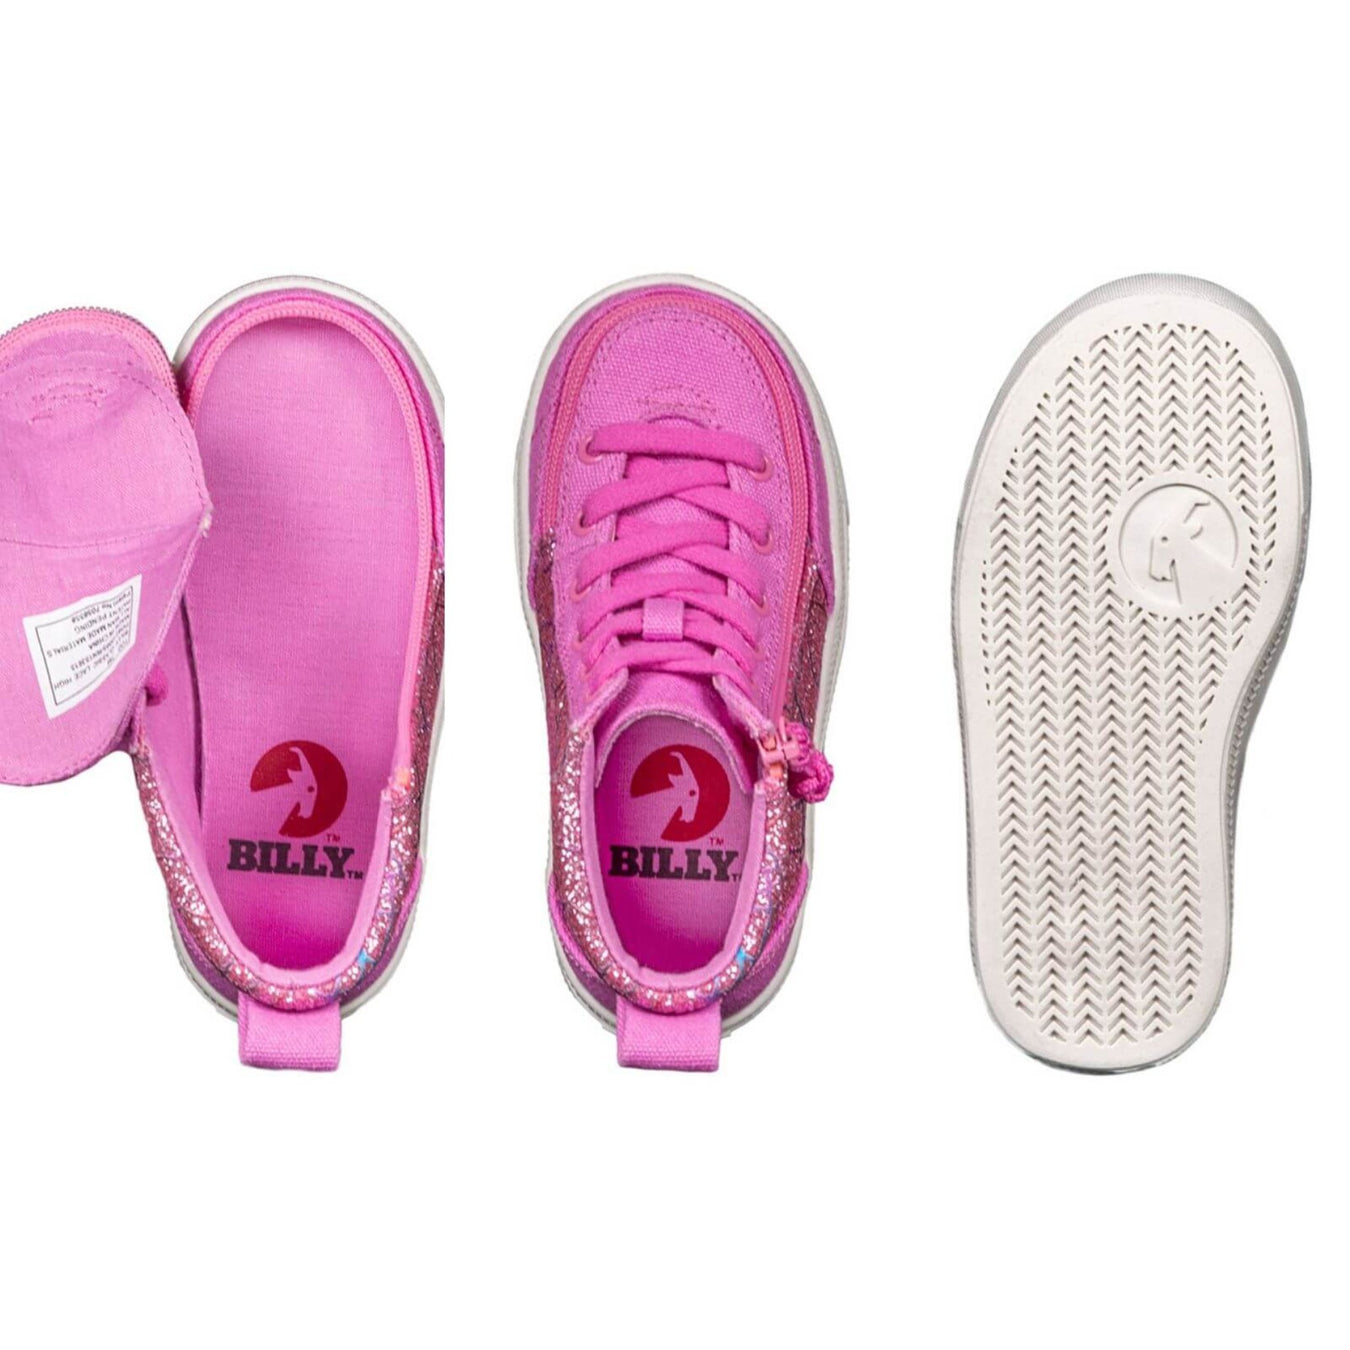 billy_footwear_for_girls_adaptable_shoes_and_boots_for_kids_with_special_needs